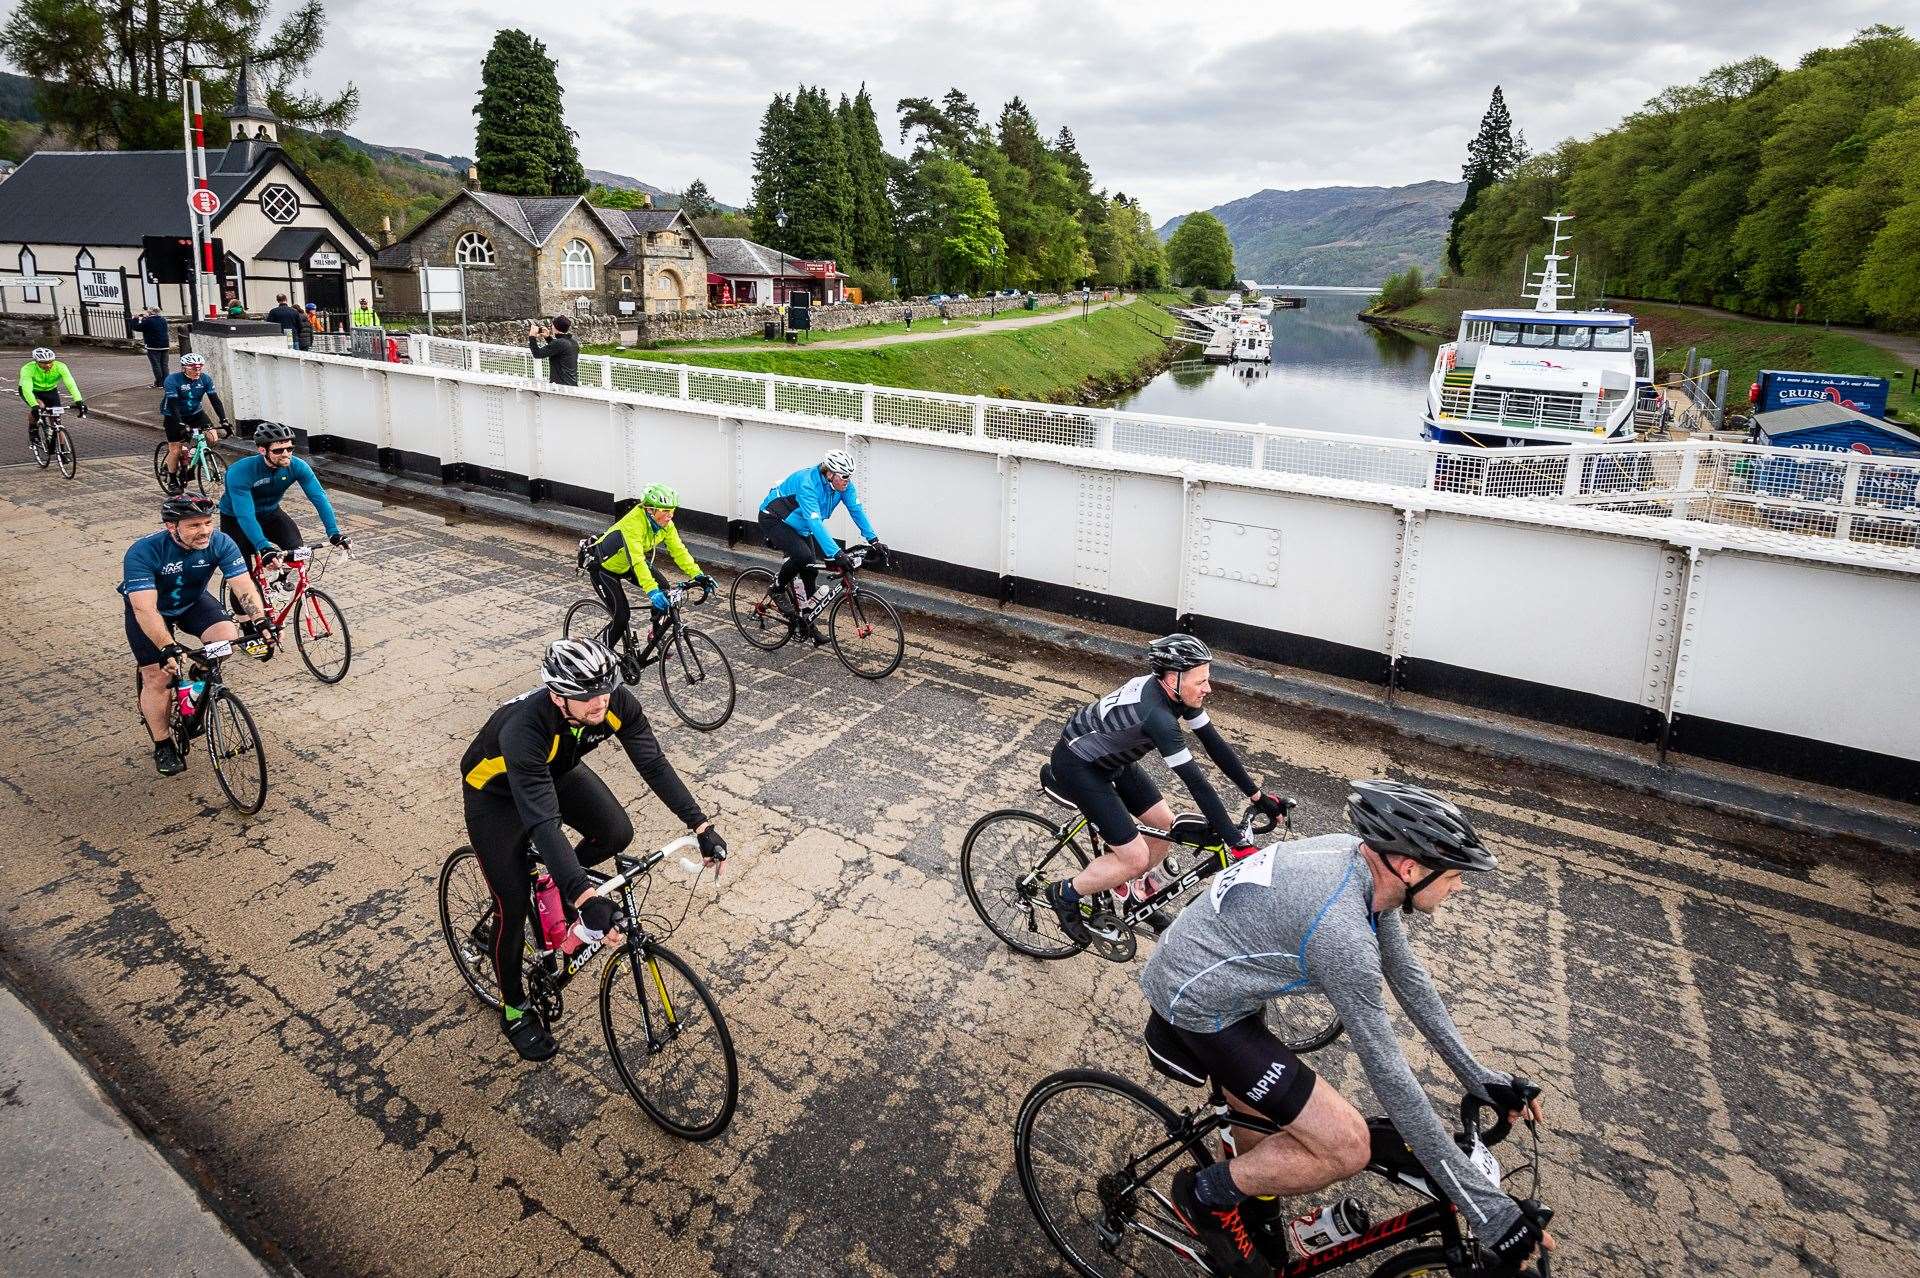 The Etape Loch Ness sees cyclists ride round the loch on closed roads.